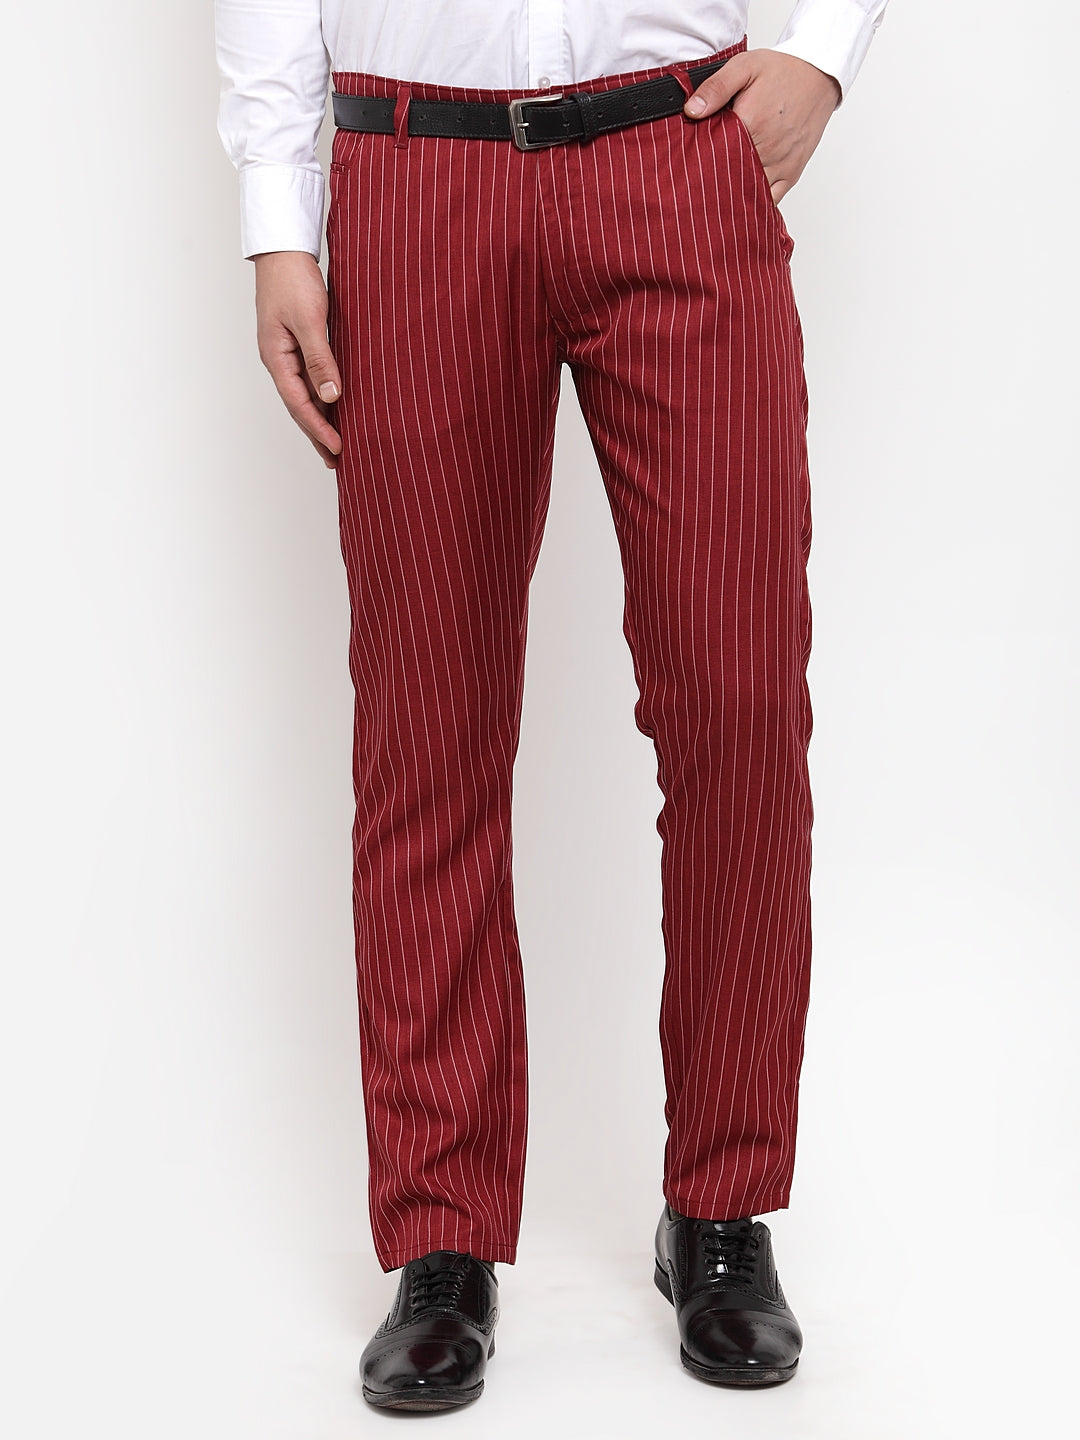 Marc Jacobs Marc by Marc Jacobs Slim Fit Striped Formal Pants | Grailed